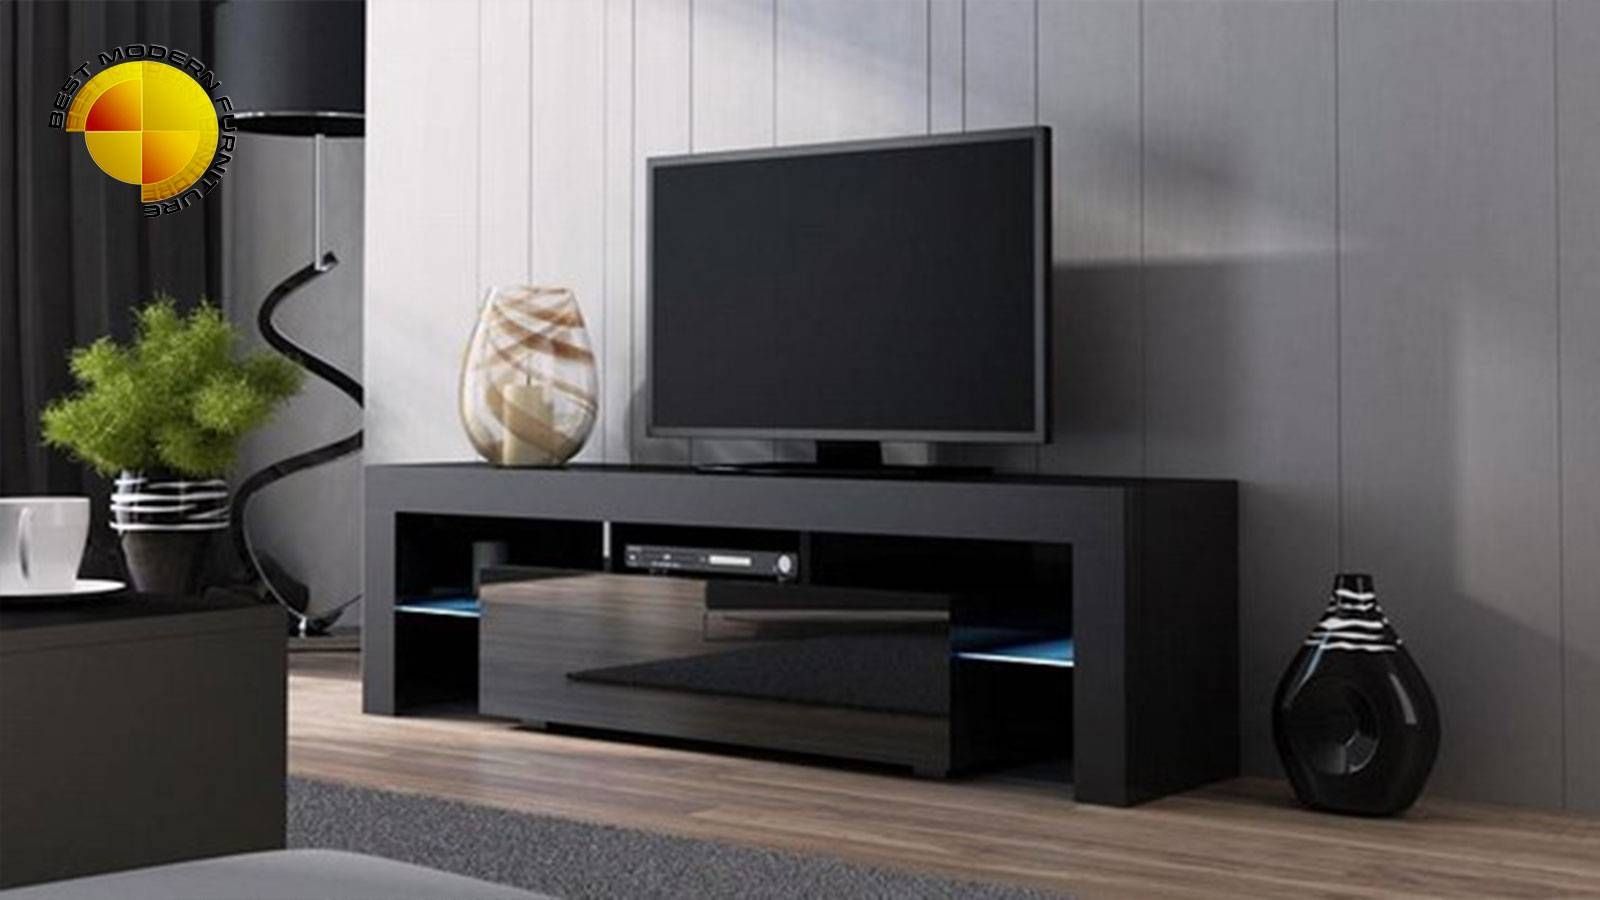 Modern Tv Stand 160cm High Gloss Cabinet Rgb Led Lights Black Unit Within Gloss Tv Stands (View 4 of 15)